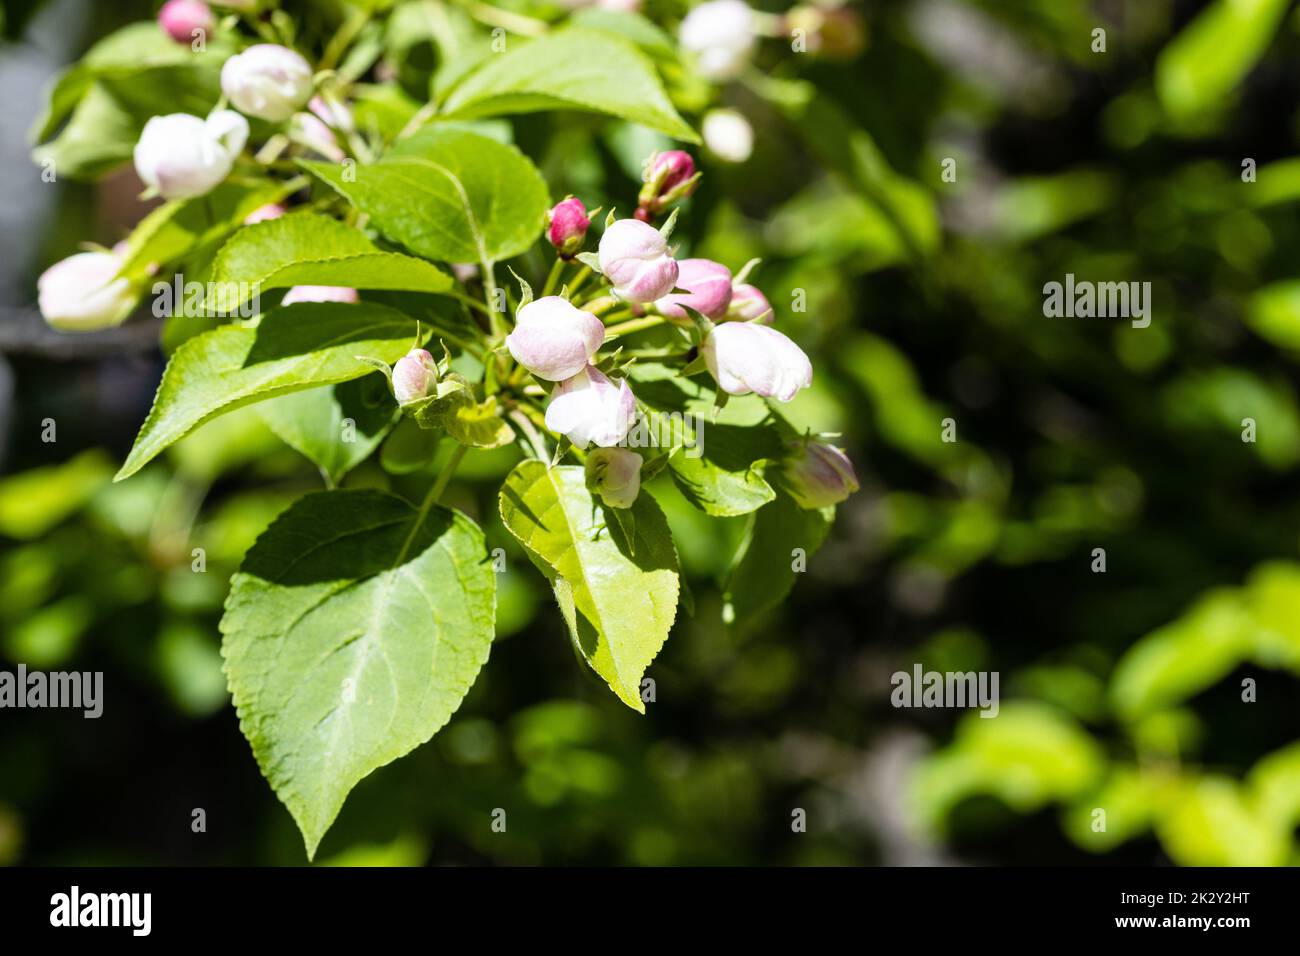 pink buds on twig of tree and dark green foliage Stock Photo